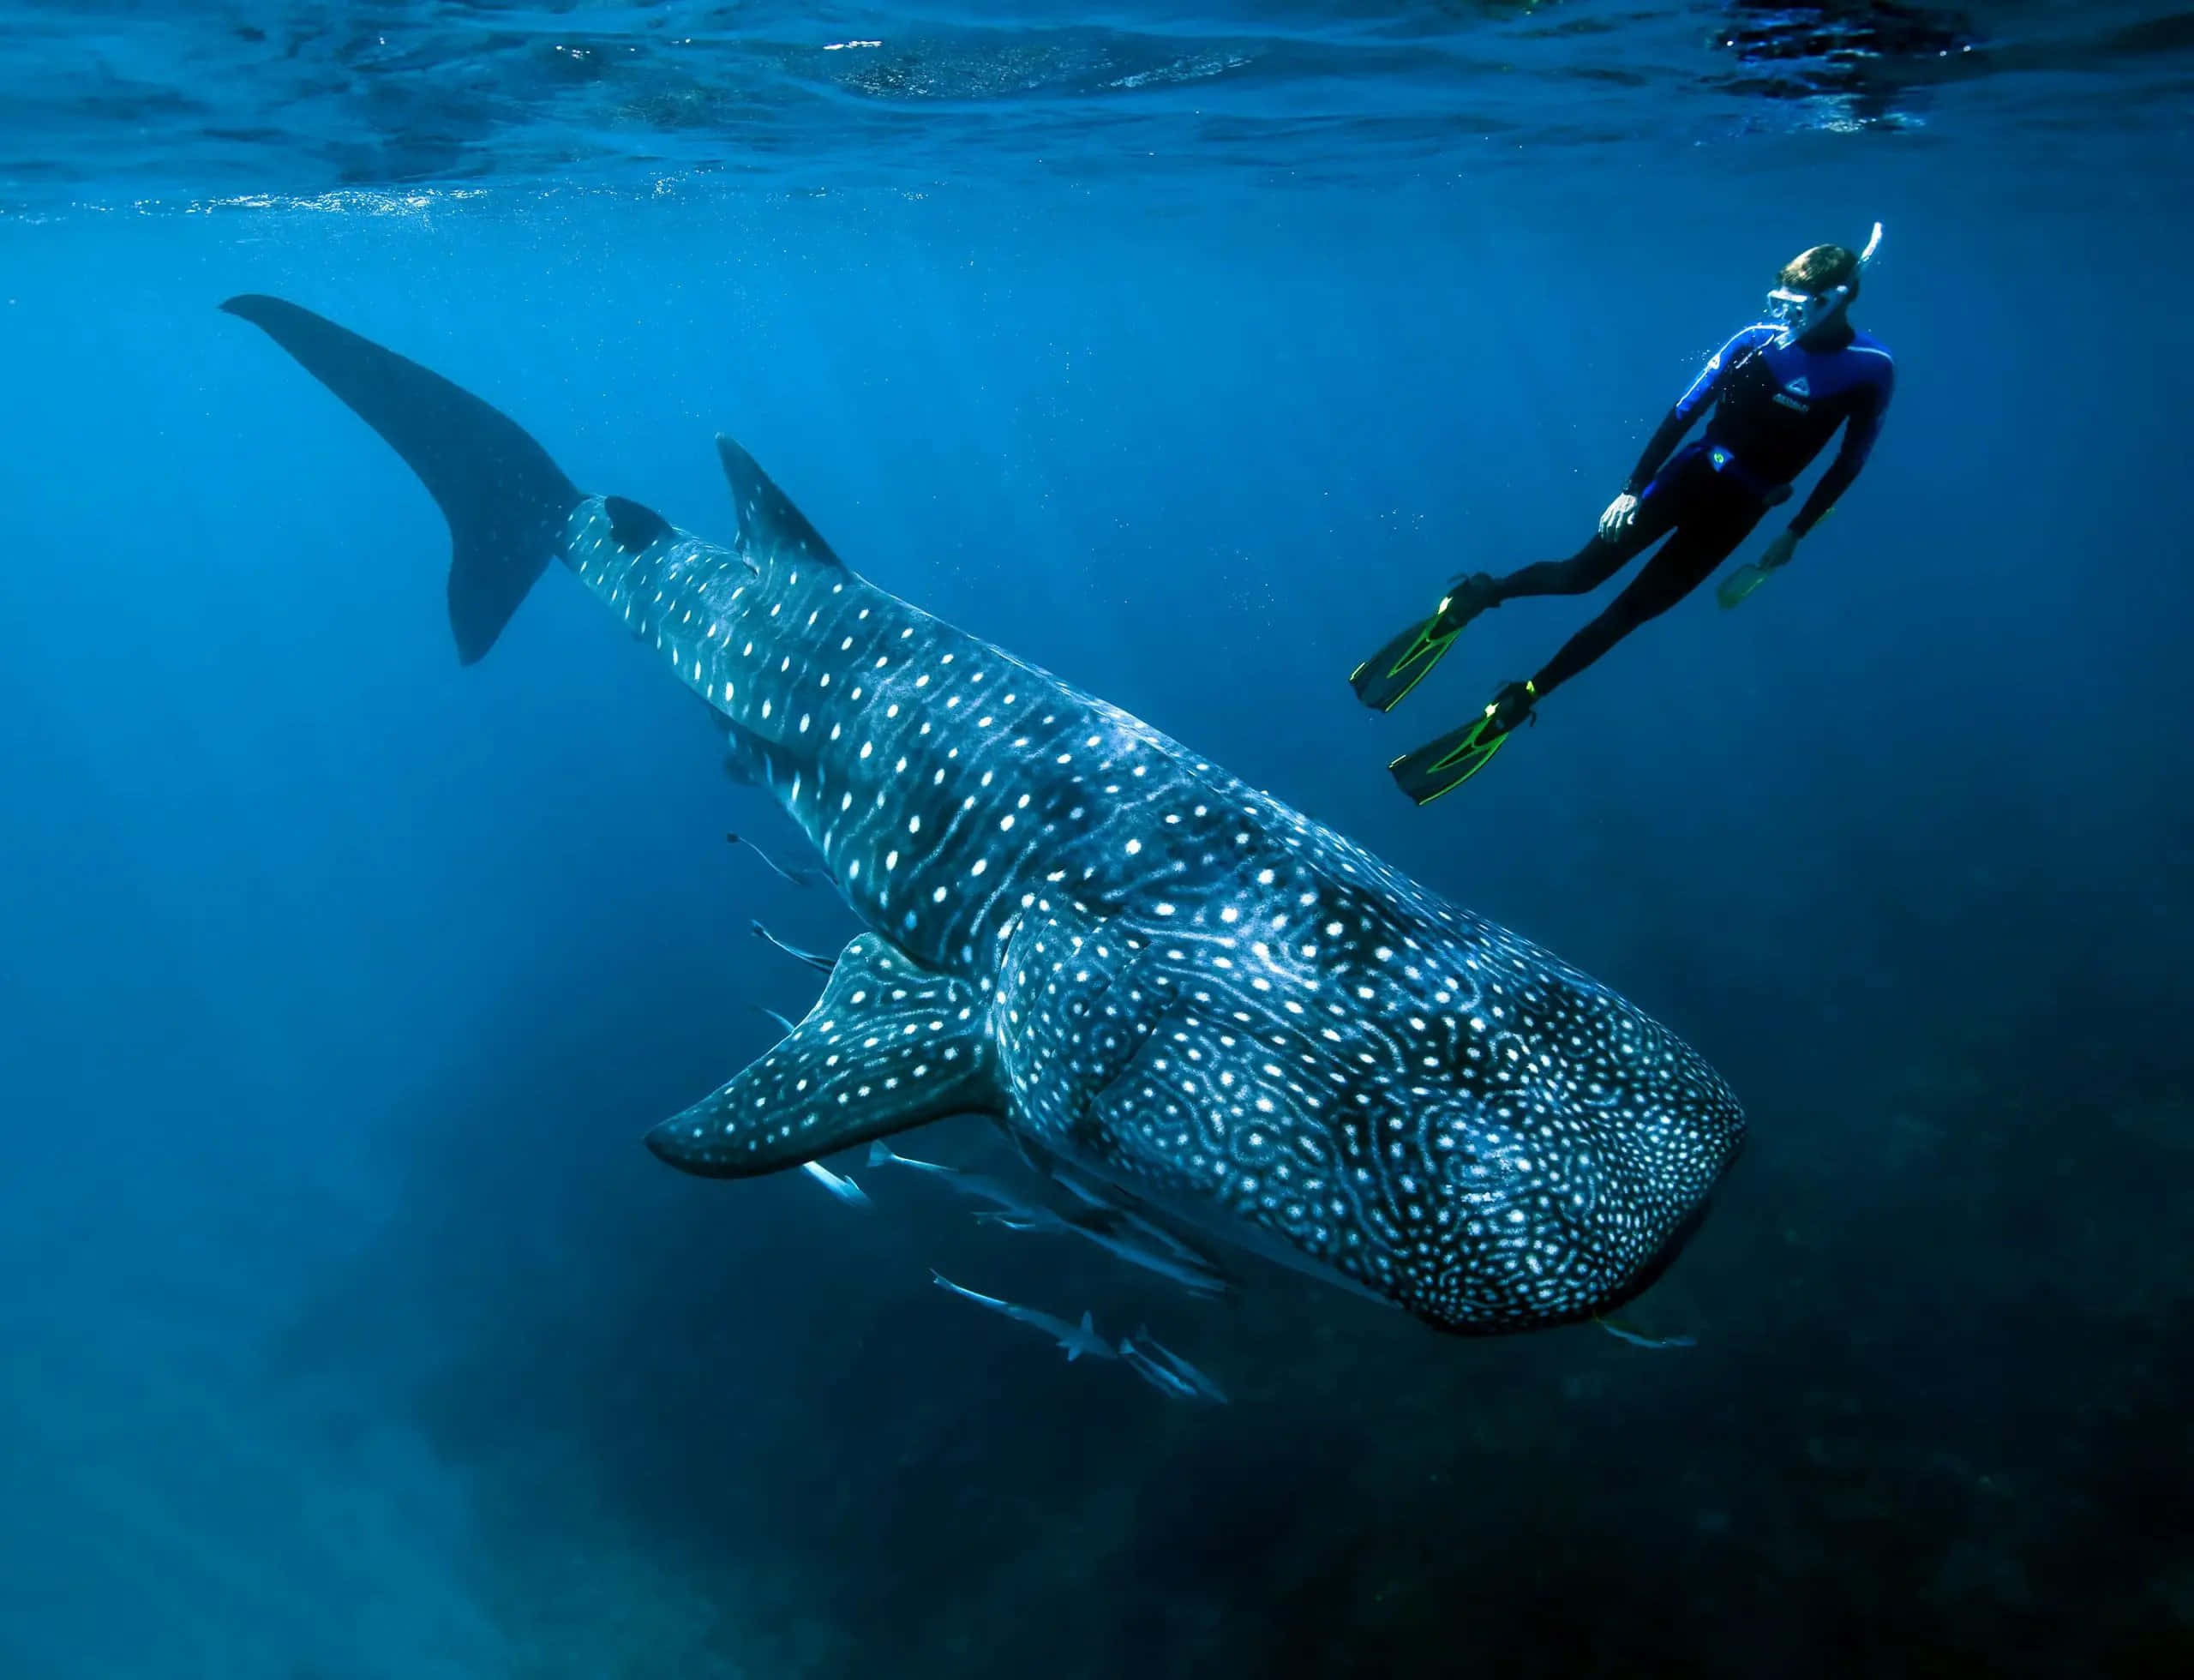 An up close view of the majestic Whale Shark, the largest fish in the sea